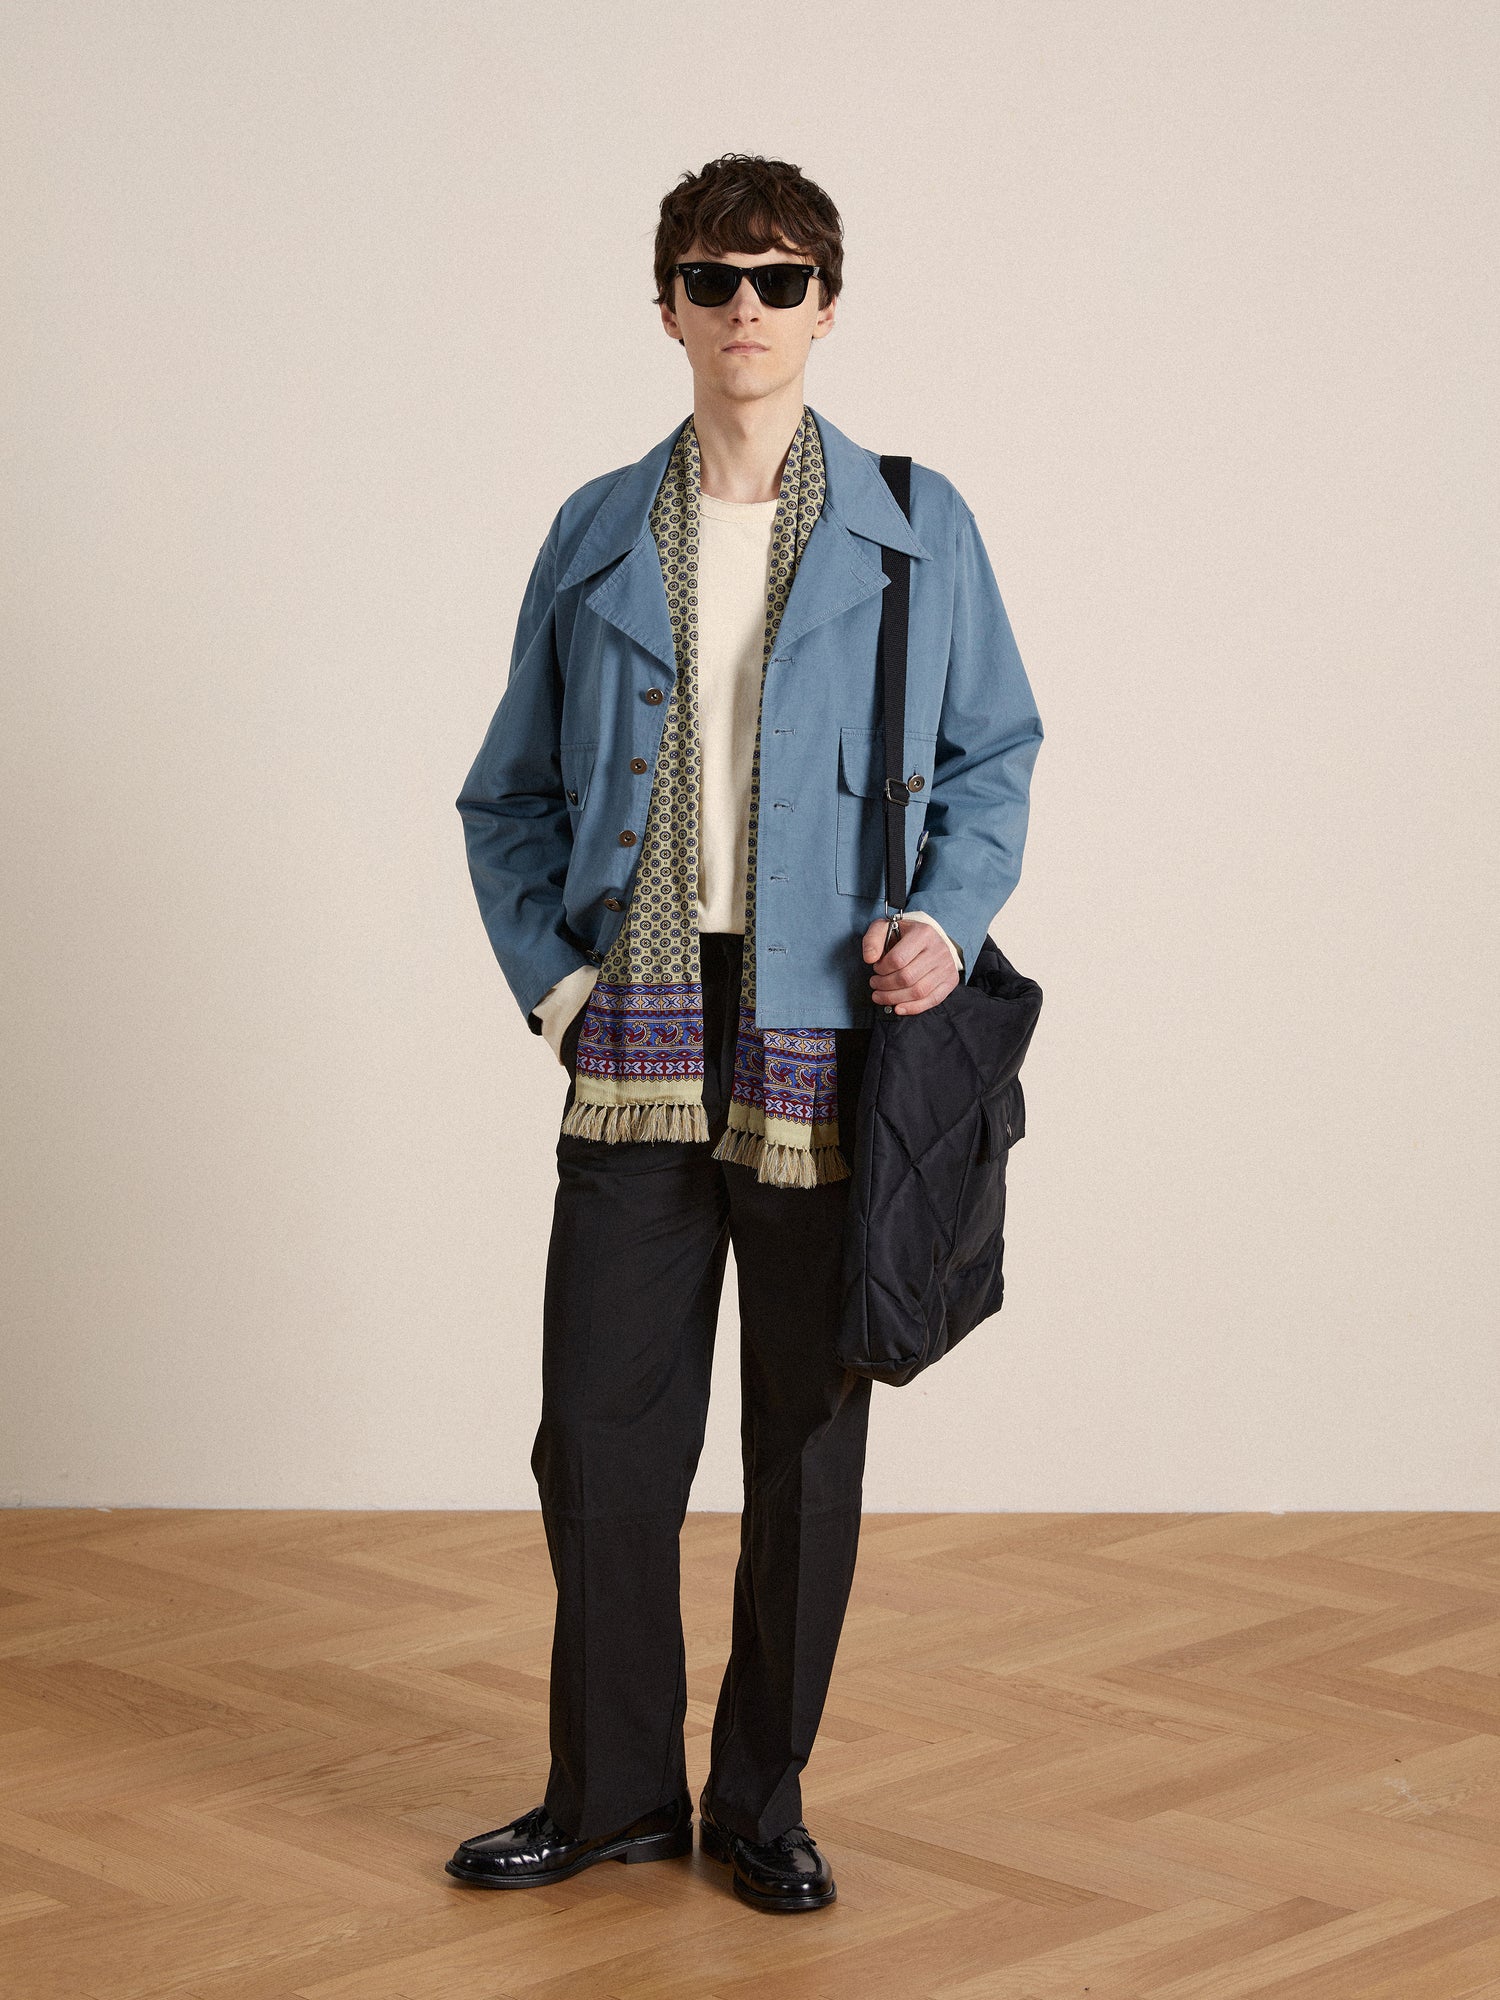 A man in a vintage Found Patina Work Jacket and sunglasses is standing on a wooden floor.